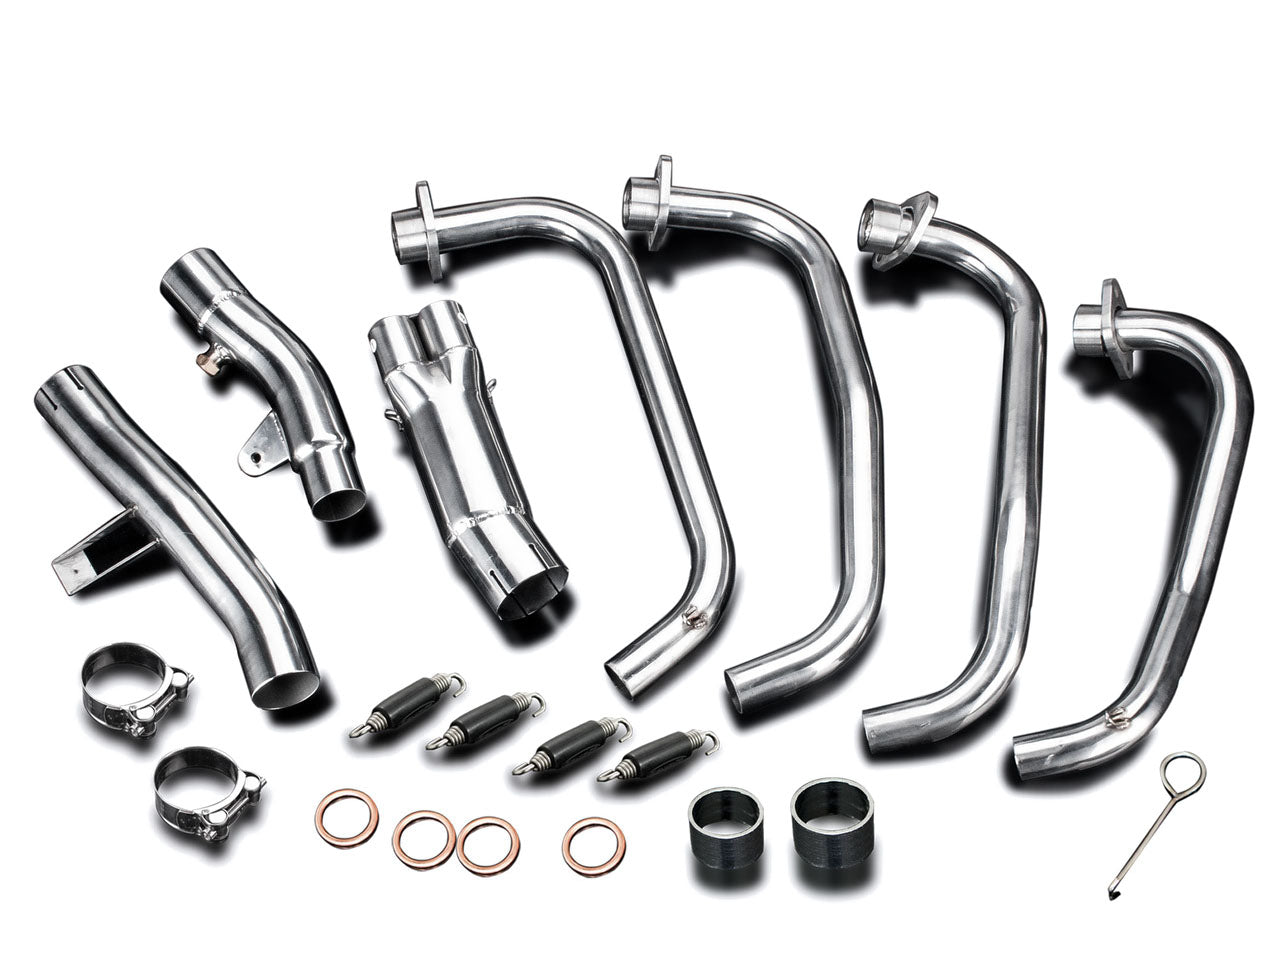 DELKEVIC Honda CB1100 Full Exhaust System with SL10 14" Silencer